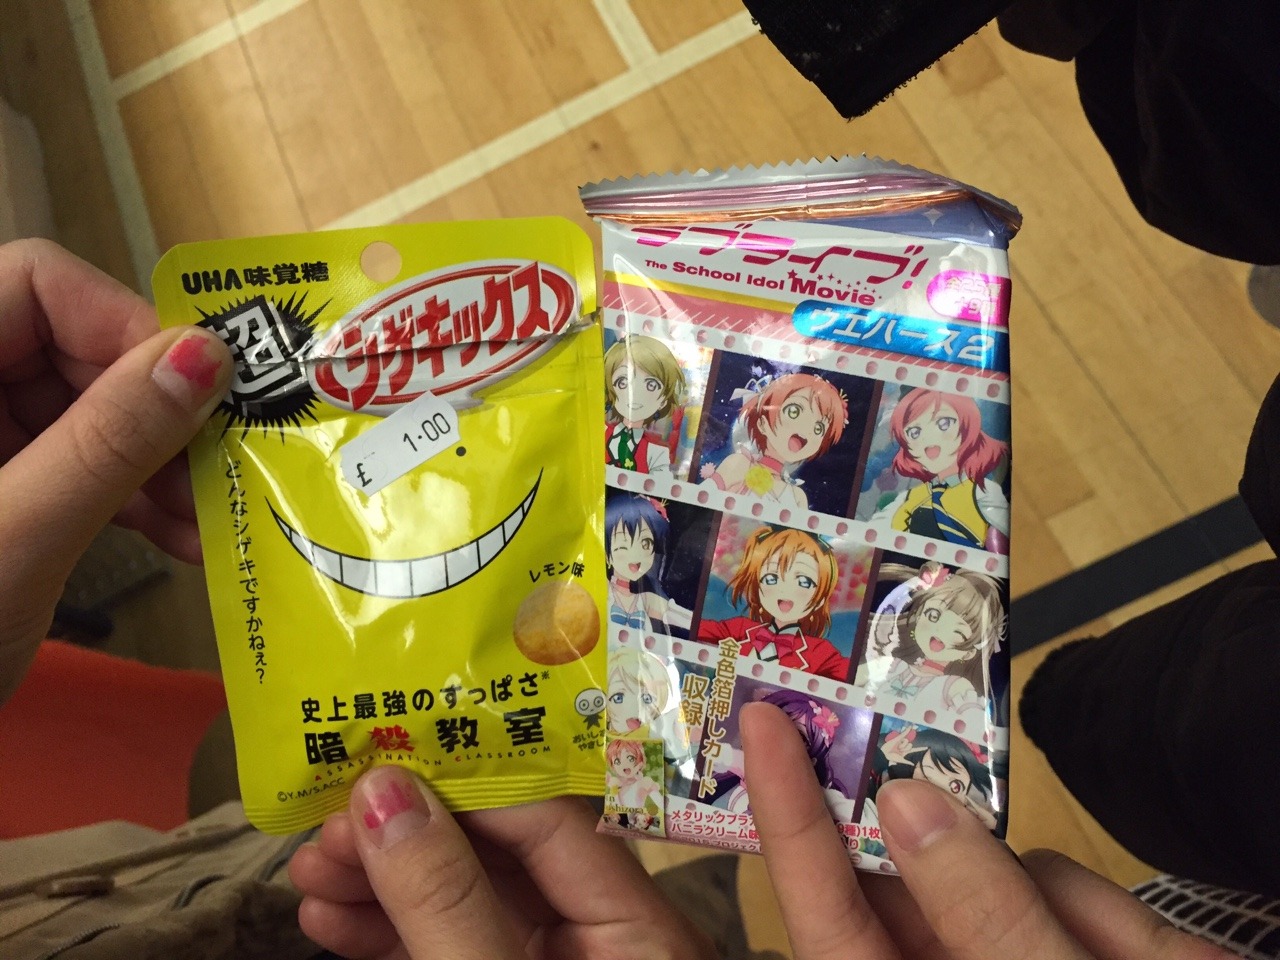 Yuri got an Assassination Classroom packet of candy while I got Love Live wafers